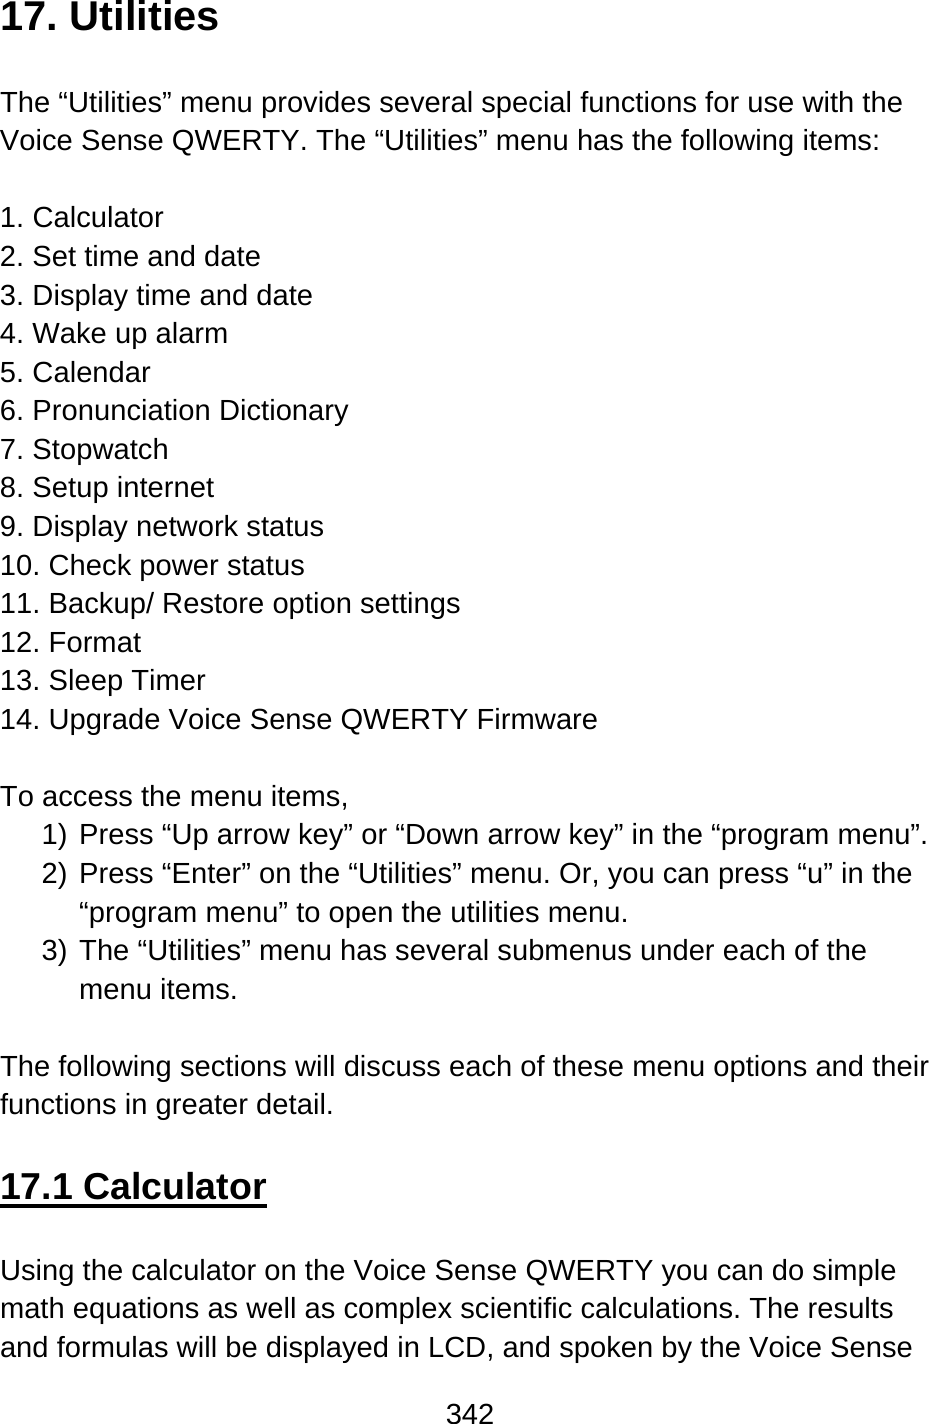 342  17. Utilities  The “Utilities” menu provides several special functions for use with the Voice Sense QWERTY. The “Utilities” menu has the following items:  1. Calculator   2. Set time and date 3. Display time and date 4. Wake up alarm 5. Calendar 6. Pronunciation Dictionary 7. Stopwatch   8. Setup internet   9. Display network status 10. Check power status 11. Backup/ Restore option settings 12. Format 13. Sleep Timer 14. Upgrade Voice Sense QWERTY Firmware  To access the menu items, 1) Press “Up arrow key” or “Down arrow key” in the “program menu”. 2) Press “Enter” on the “Utilities” menu. Or, you can press “u” in the “program menu” to open the utilities menu.     3) The “Utilities” menu has several submenus under each of the menu items.     The following sections will discuss each of these menu options and their functions in greater detail.  17.1 Calculator  Using the calculator on the Voice Sense QWERTY you can do simple math equations as well as complex scientific calculations. The results and formulas will be displayed in LCD, and spoken by the Voice Sense 